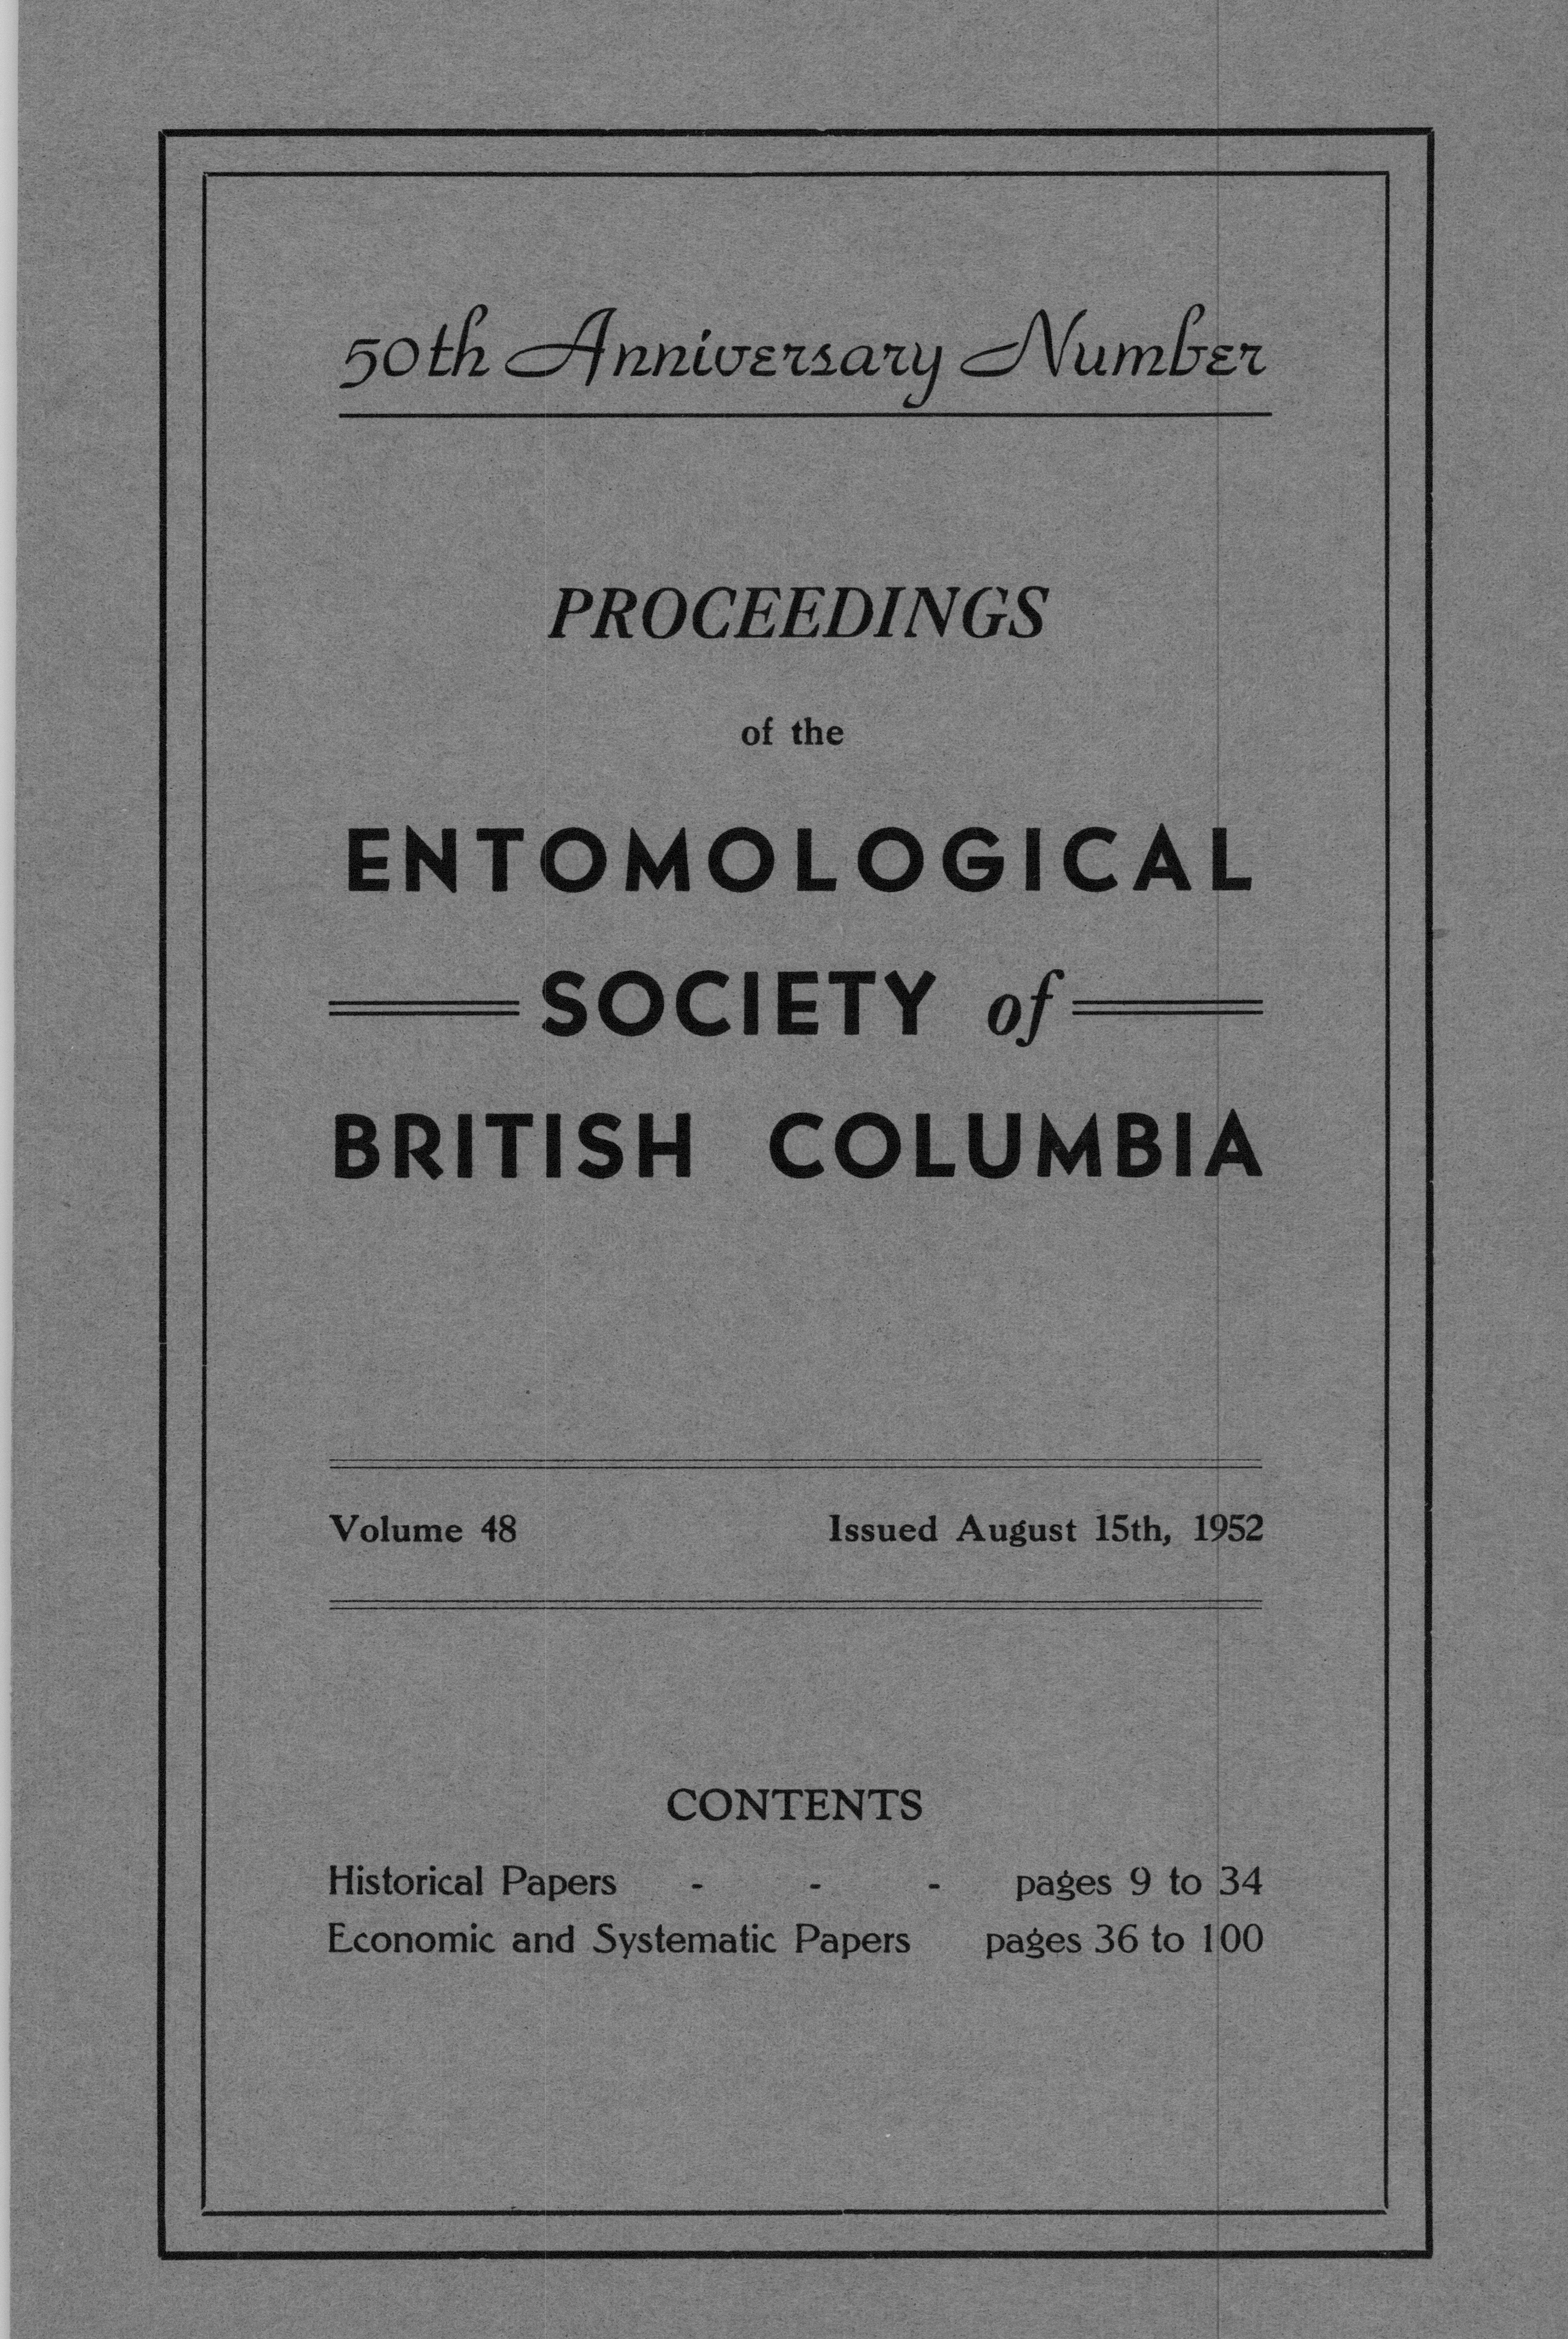 					View Vol. 48 (1952): Proceedings of the Entomological Society of British Columbia
				